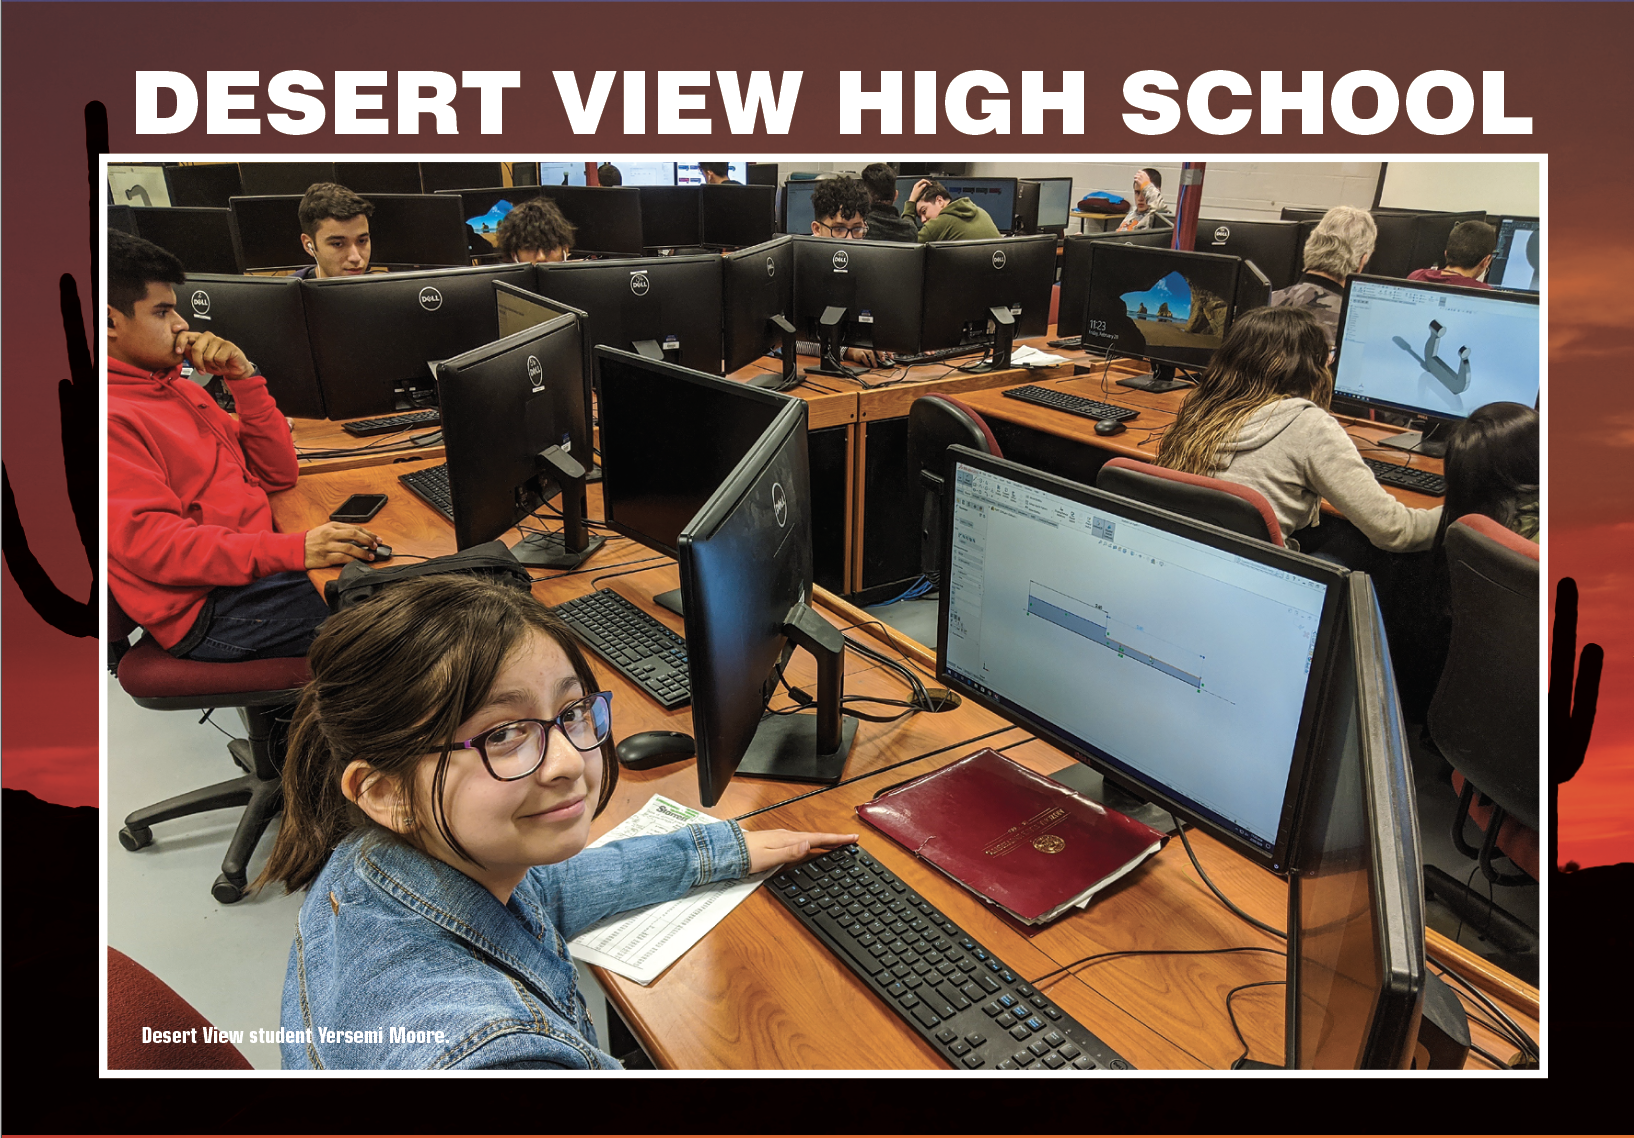 Desert View High School – Manufacturing Comes Together at Desert View